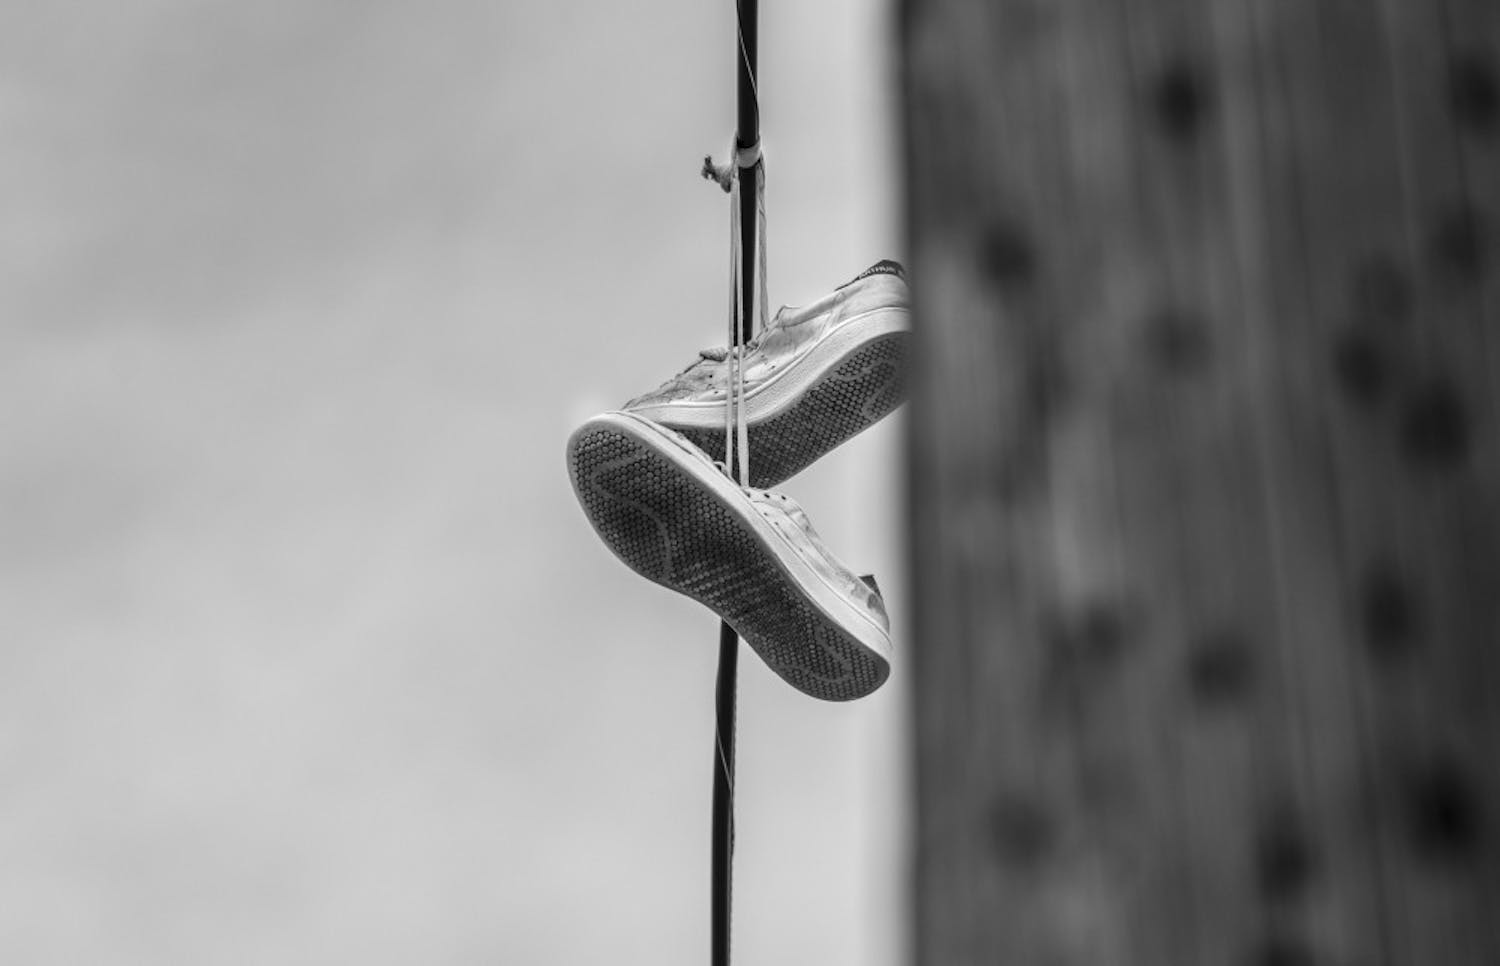 Shoes hang from telephone wires near Downtown Albuquerque. In many inner cities, shoes hanging from telephone wires indicates that a nearby house sells drugs, a problem that plagues the homeless community. People who are homelessness often also experience domestic violence, mental illness, or a combination of these factors.